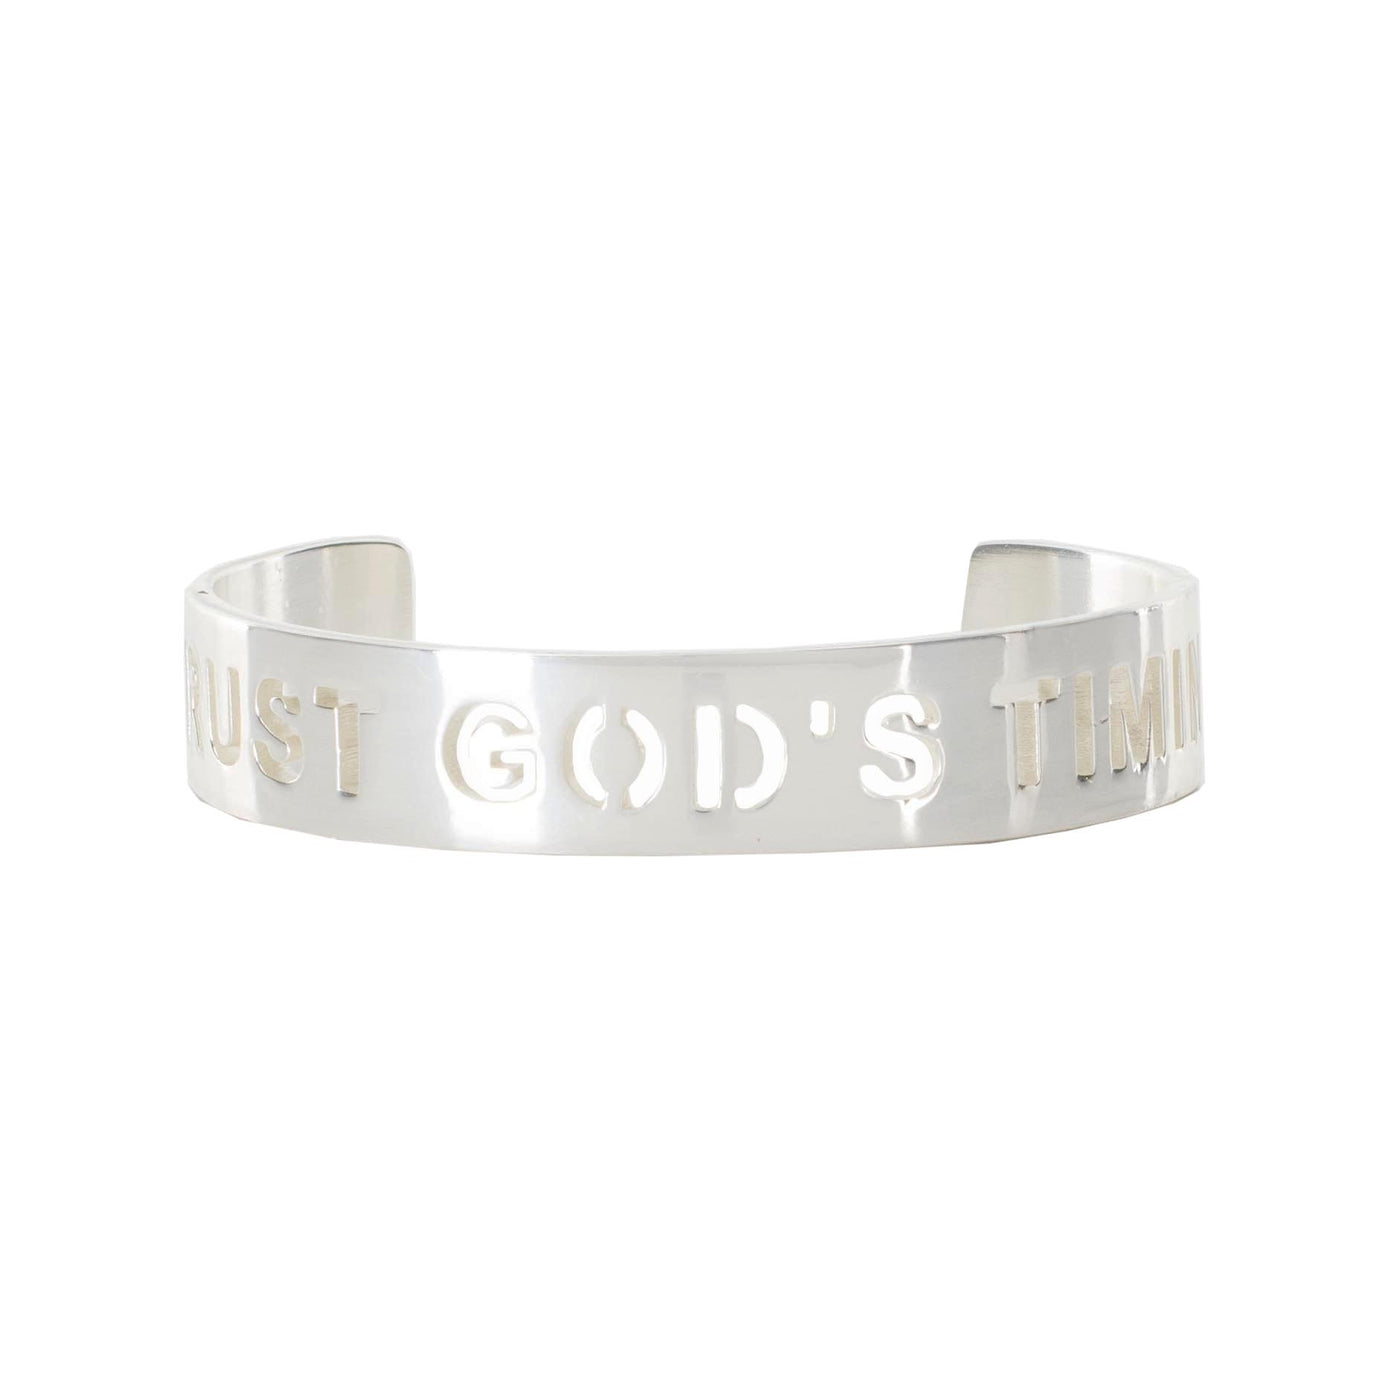 St Louis - Trust God's Timing - Silver